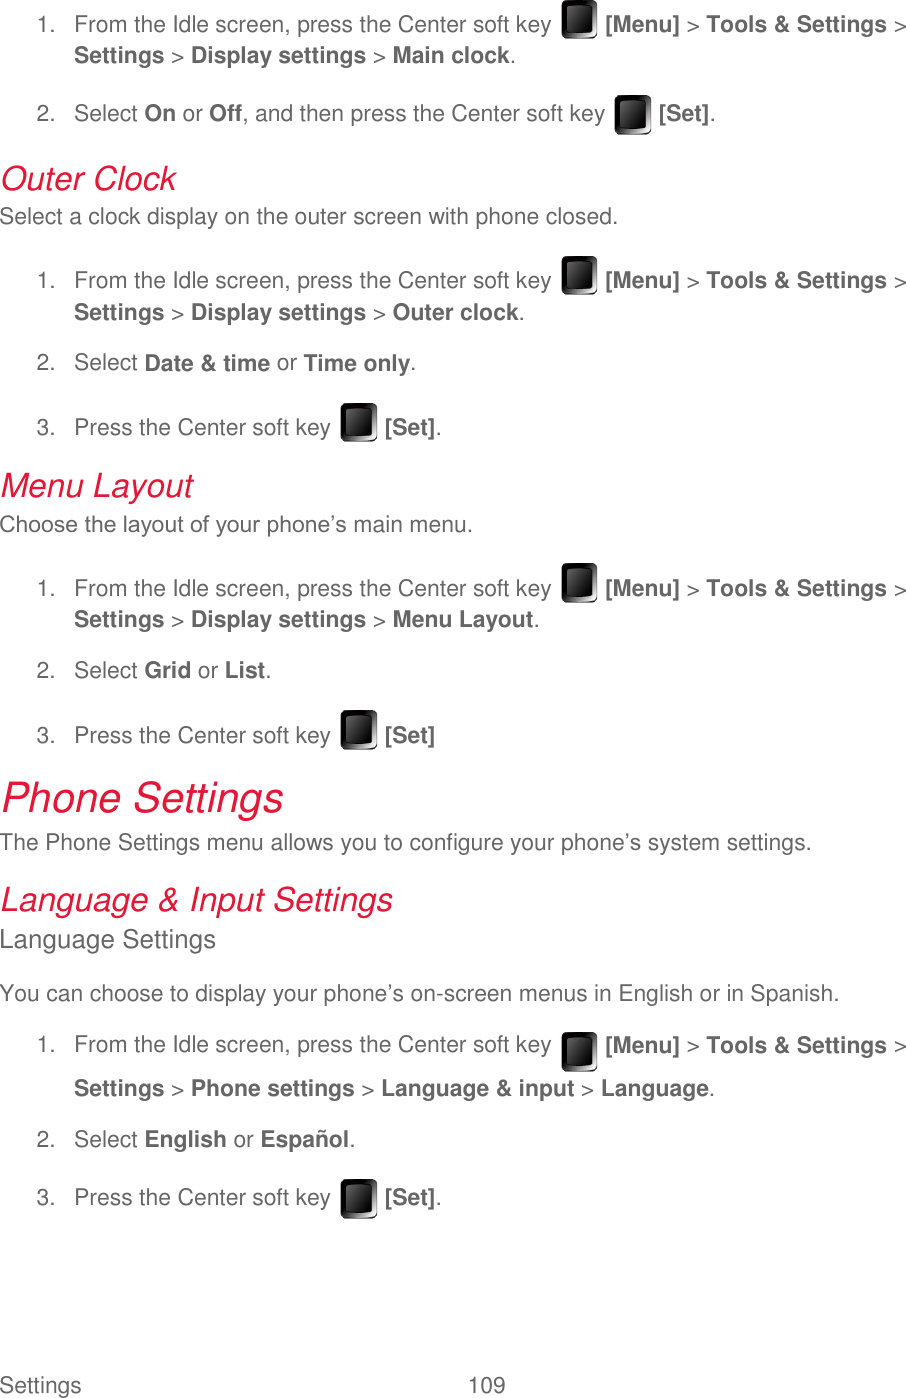 Settings  109     From the Idle screen, press the Center soft key   [Menu] &gt; Tools &amp; Settings &gt; 1.Settings &gt; Display settings &gt; Main clock.   Select On or Off, and then press the Center soft key   [Set]. 2.Outer Clock Select a clock display on the outer screen with phone closed.   From the Idle screen, press the Center soft key   [Menu] &gt; Tools &amp; Settings &gt; 1.Settings &gt; Display settings &gt; Outer clock.   Select Date &amp; time or Time only. 2.  Press the Center soft key   [Set]. 3.Menu Layout Choose the layout of your phone’s main menu.   From the Idle screen, press the Center soft key   [Menu] &gt; Tools &amp; Settings &gt; 1.Settings &gt; Display settings &gt; Menu Layout.   Select Grid or List. 2.  Press the Center soft key   [Set] 3.Phone Settings The Phone Settings menu allows you to configure your phone’s system settings. Language &amp; Input Settings Language Settings You can choose to display your phone’s on-screen menus in English or in Spanish.   From the Idle screen, press the Center soft key   [Menu] &gt; Tools &amp; Settings &gt; 1.Settings &gt; Phone settings &gt; Language &amp; input &gt; Language.   Select English or Español. 2.  Press the Center soft key   [Set]. 3.